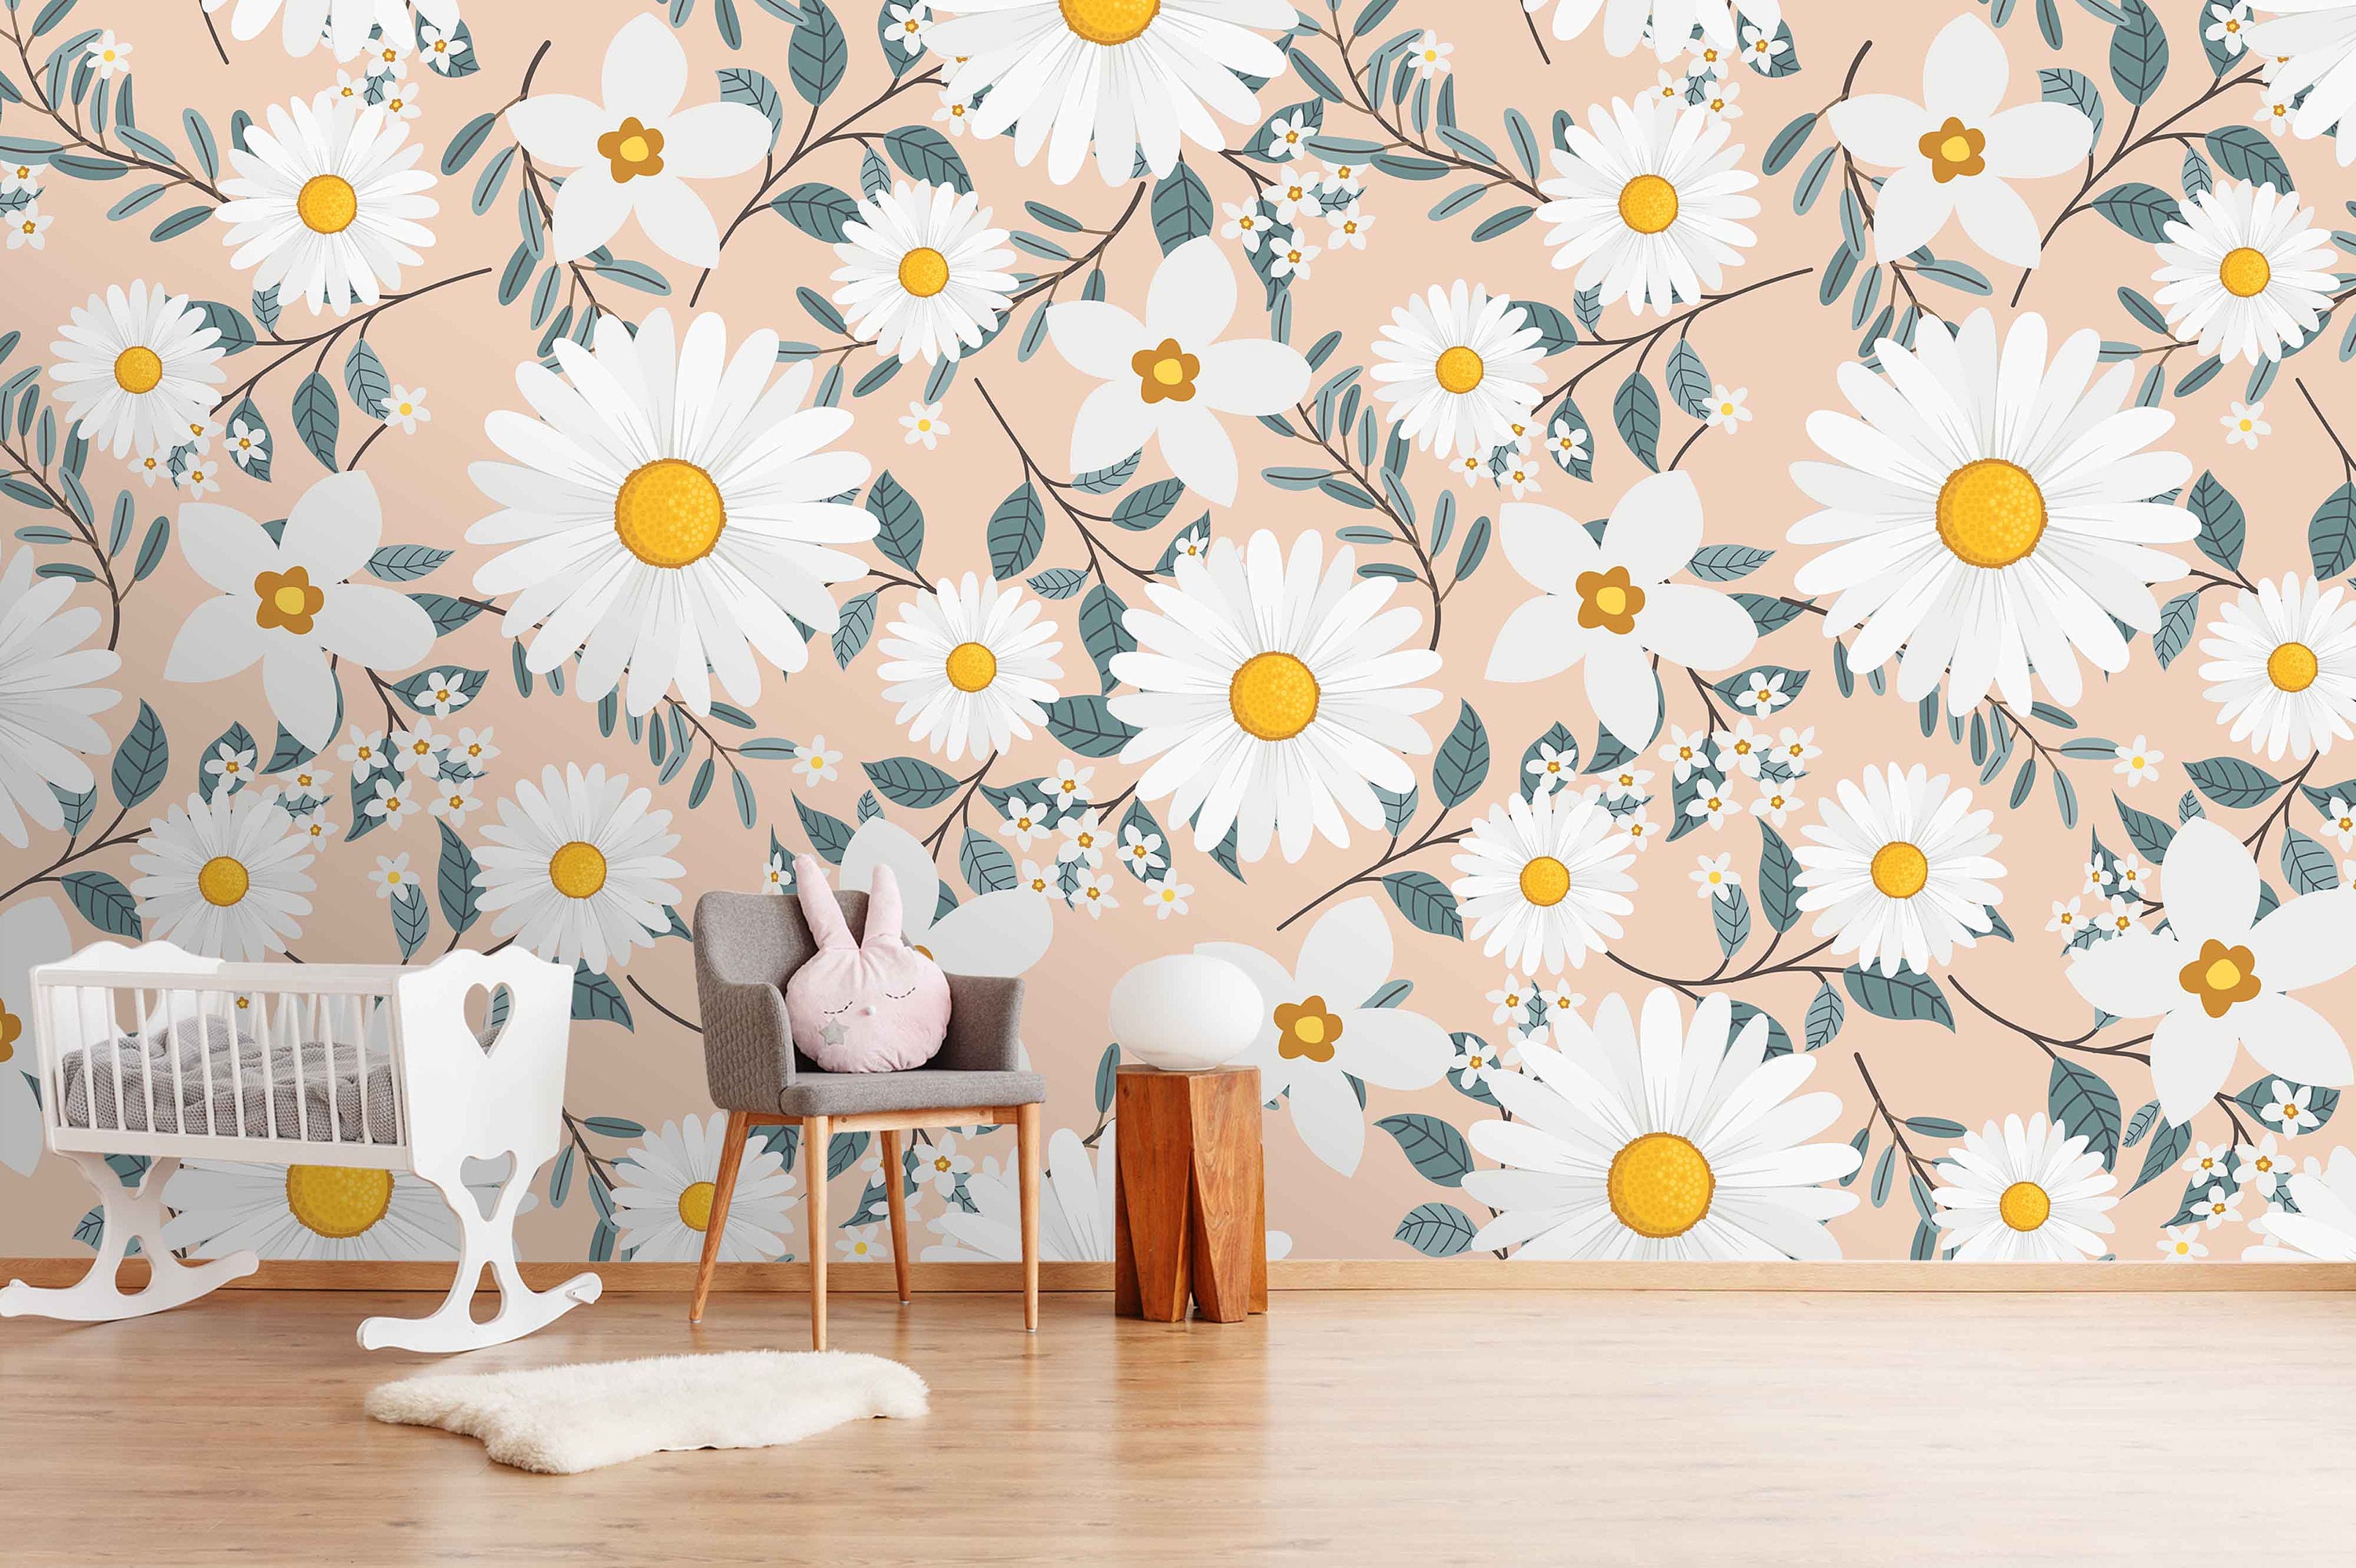 3D Daisy Flower Mural Peel and Stick Wallpaper Removable Wall - Etsy